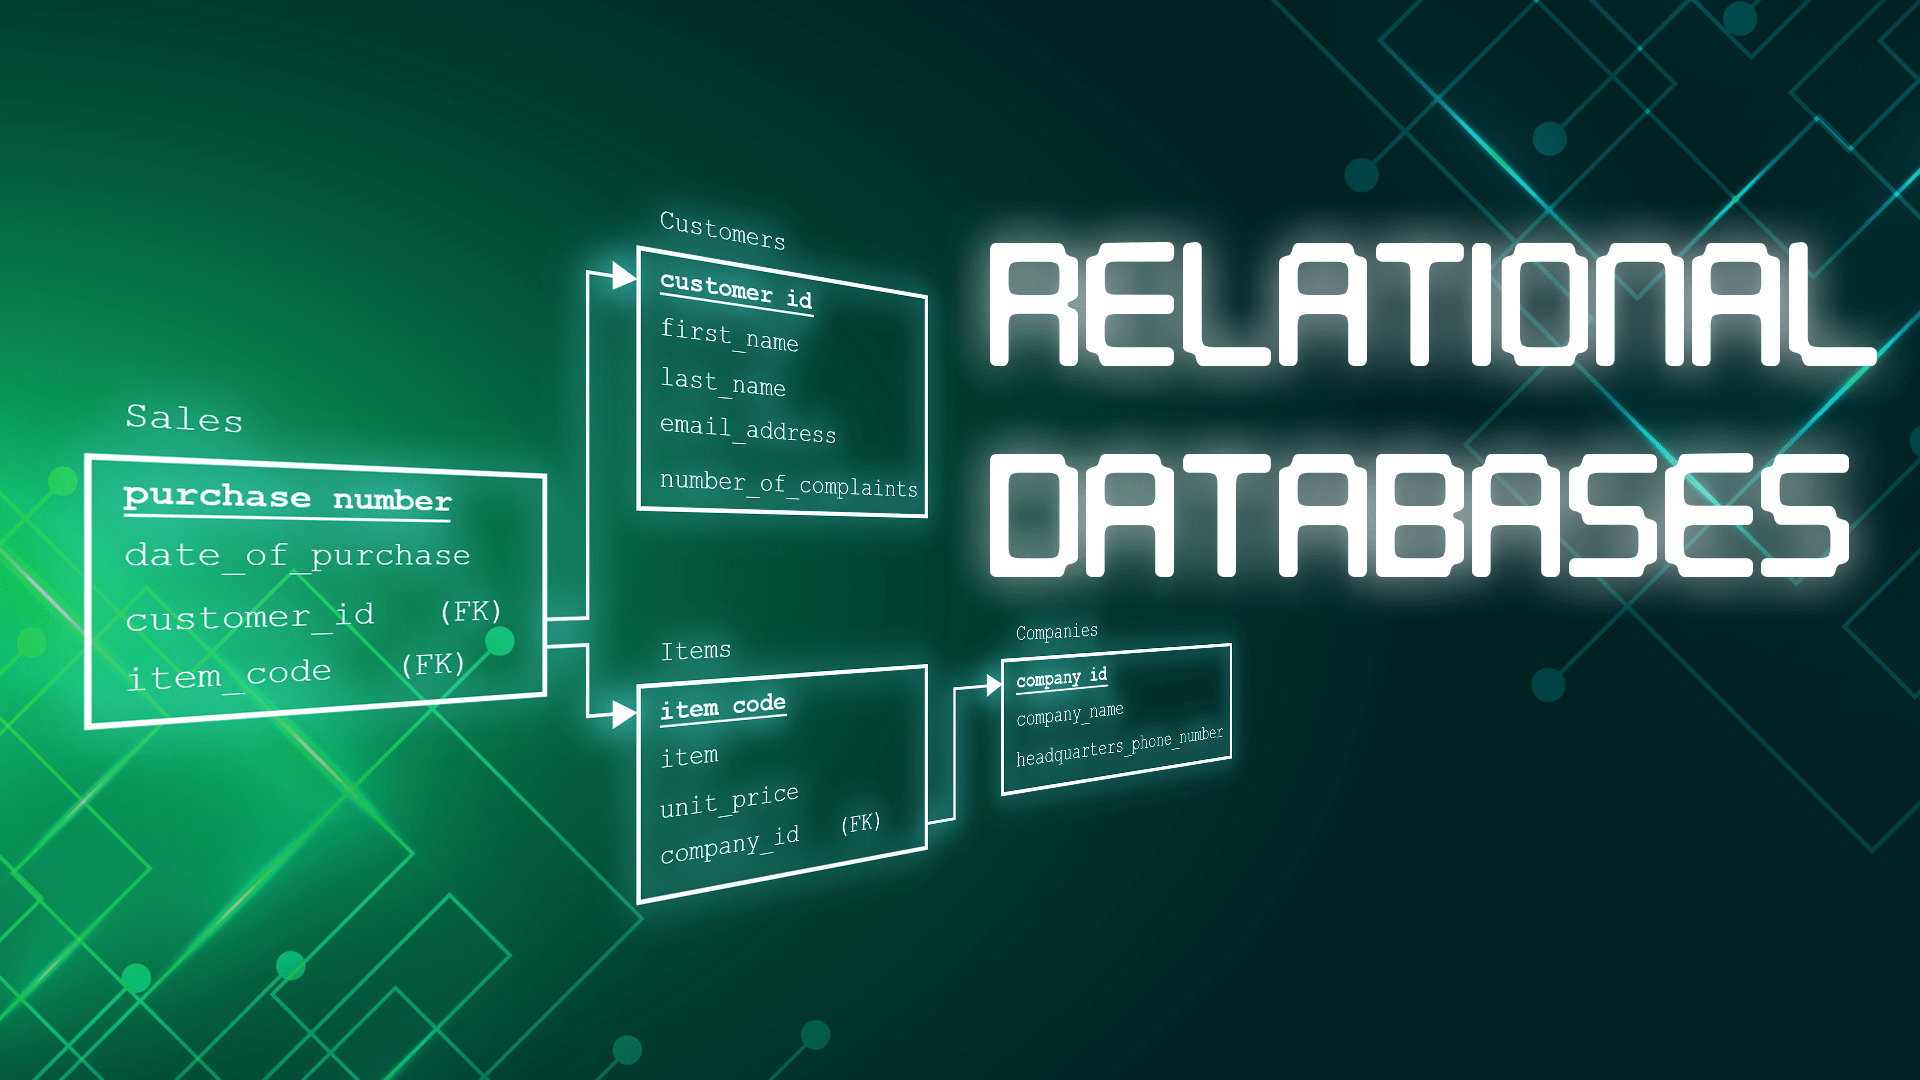 which is an advantage of using a flat file instead of a relational database?